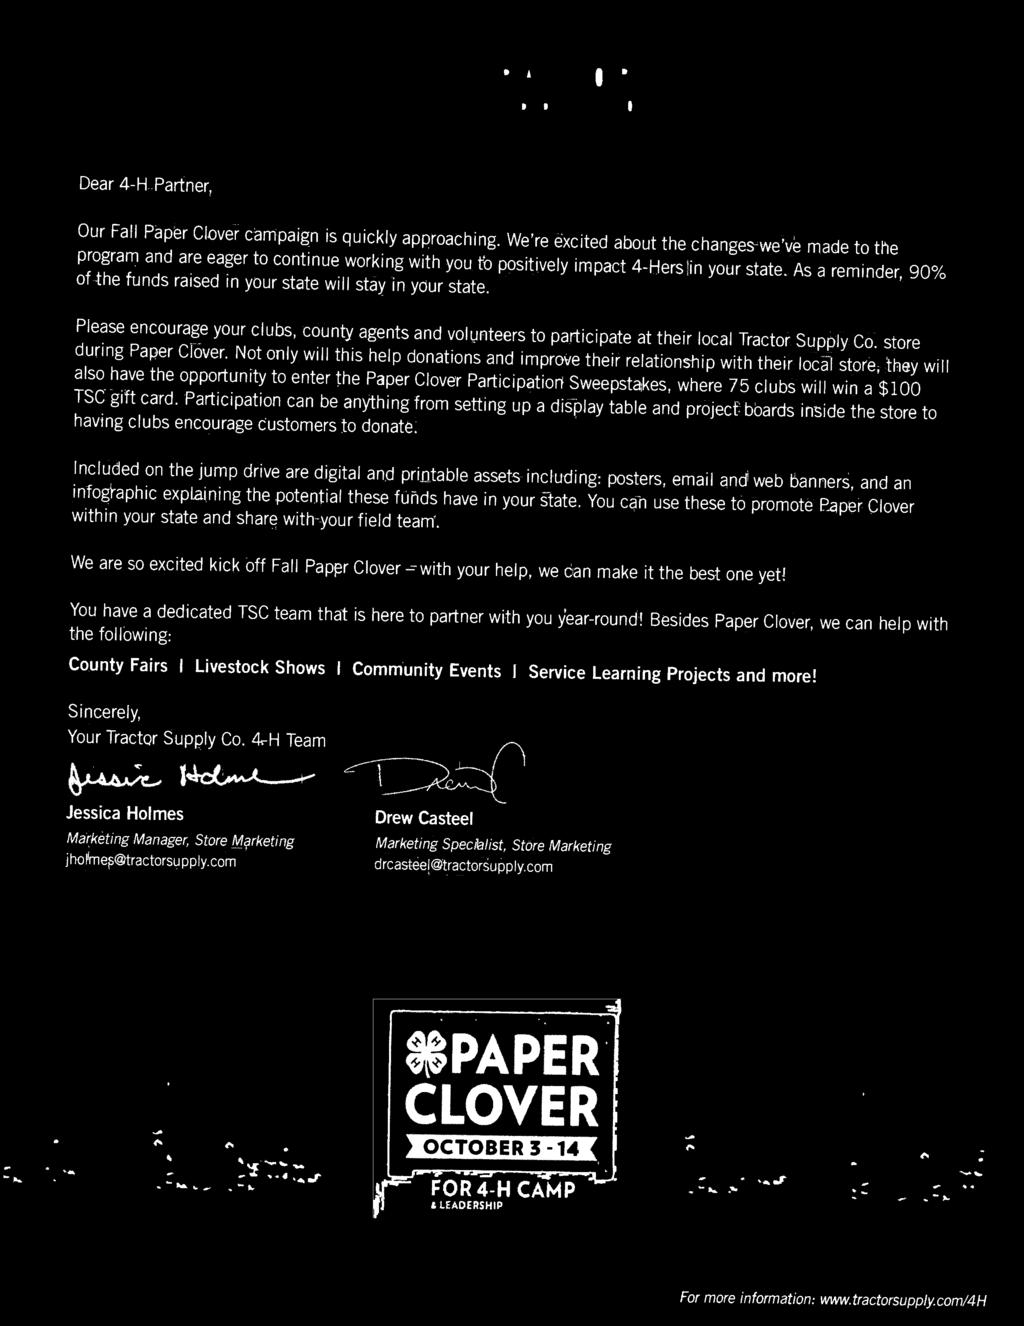 Not only will this help donations and improve their relationship with their local store, they will also have the opportunity to enter the Paper Clover Participation Sweepstakes, where 75 clubs will